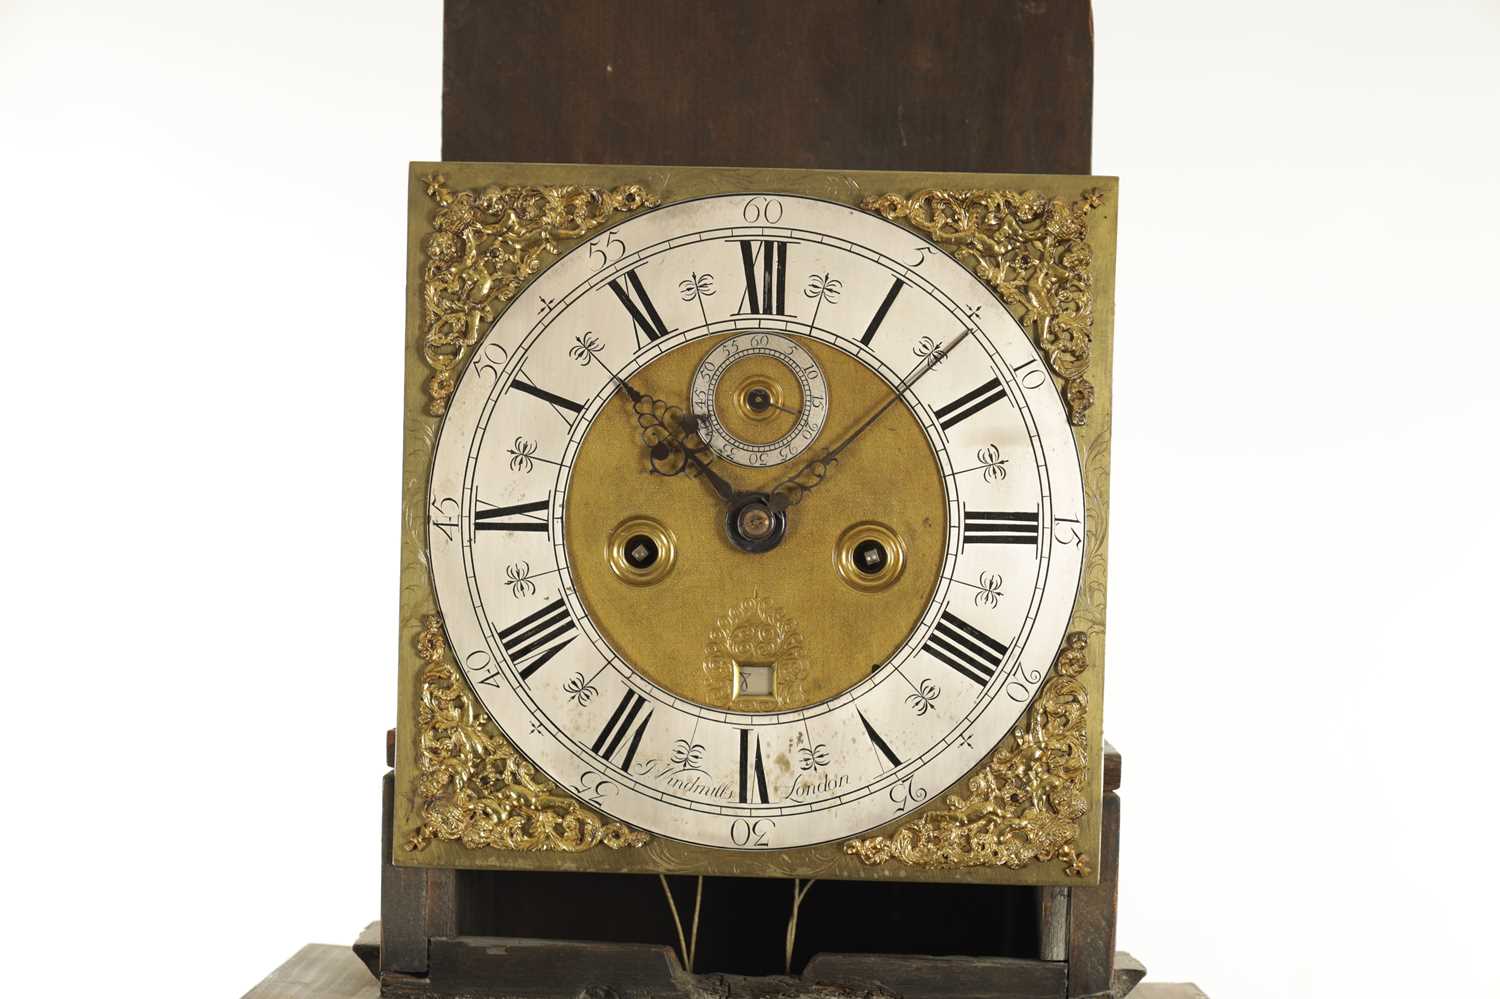 JOSEPH WINDMILLS, LONDON. A FINE EARLY 18TH CENTURY MARQUETRY EIGHT-DAY LONGCASE CLOCK - Image 3 of 5